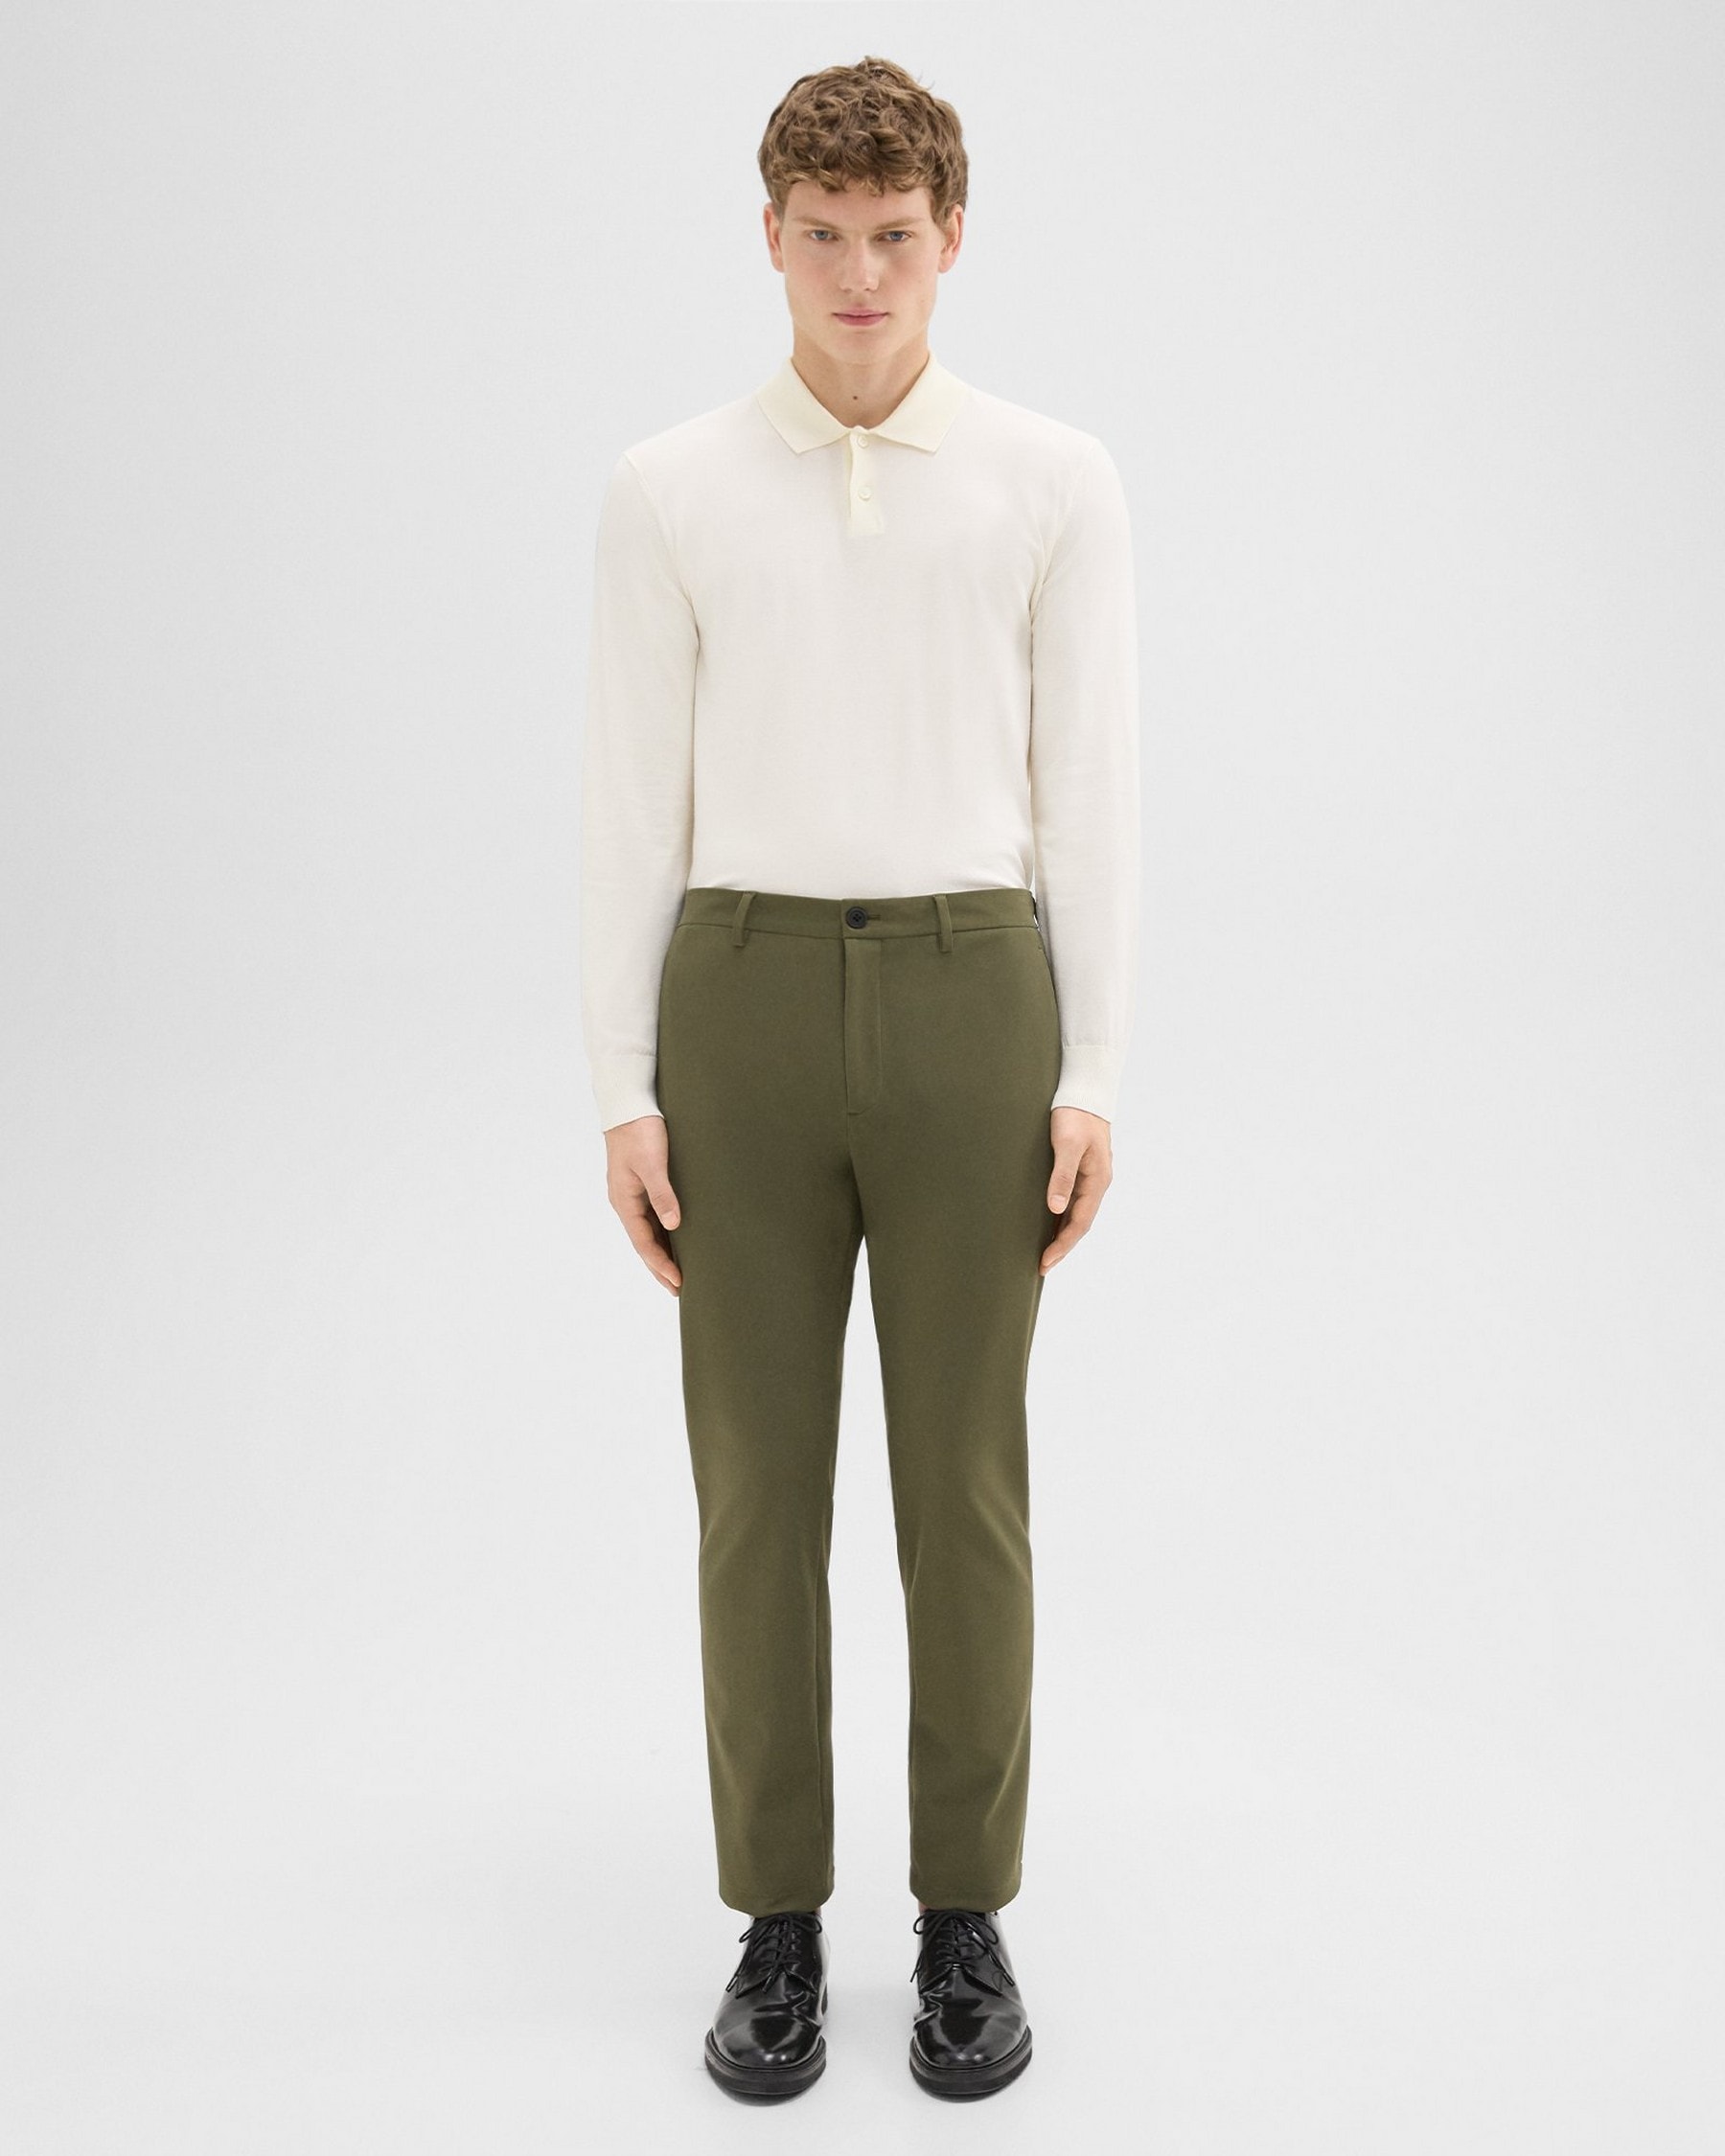 Theory Zaine Pant in Precision Ponte